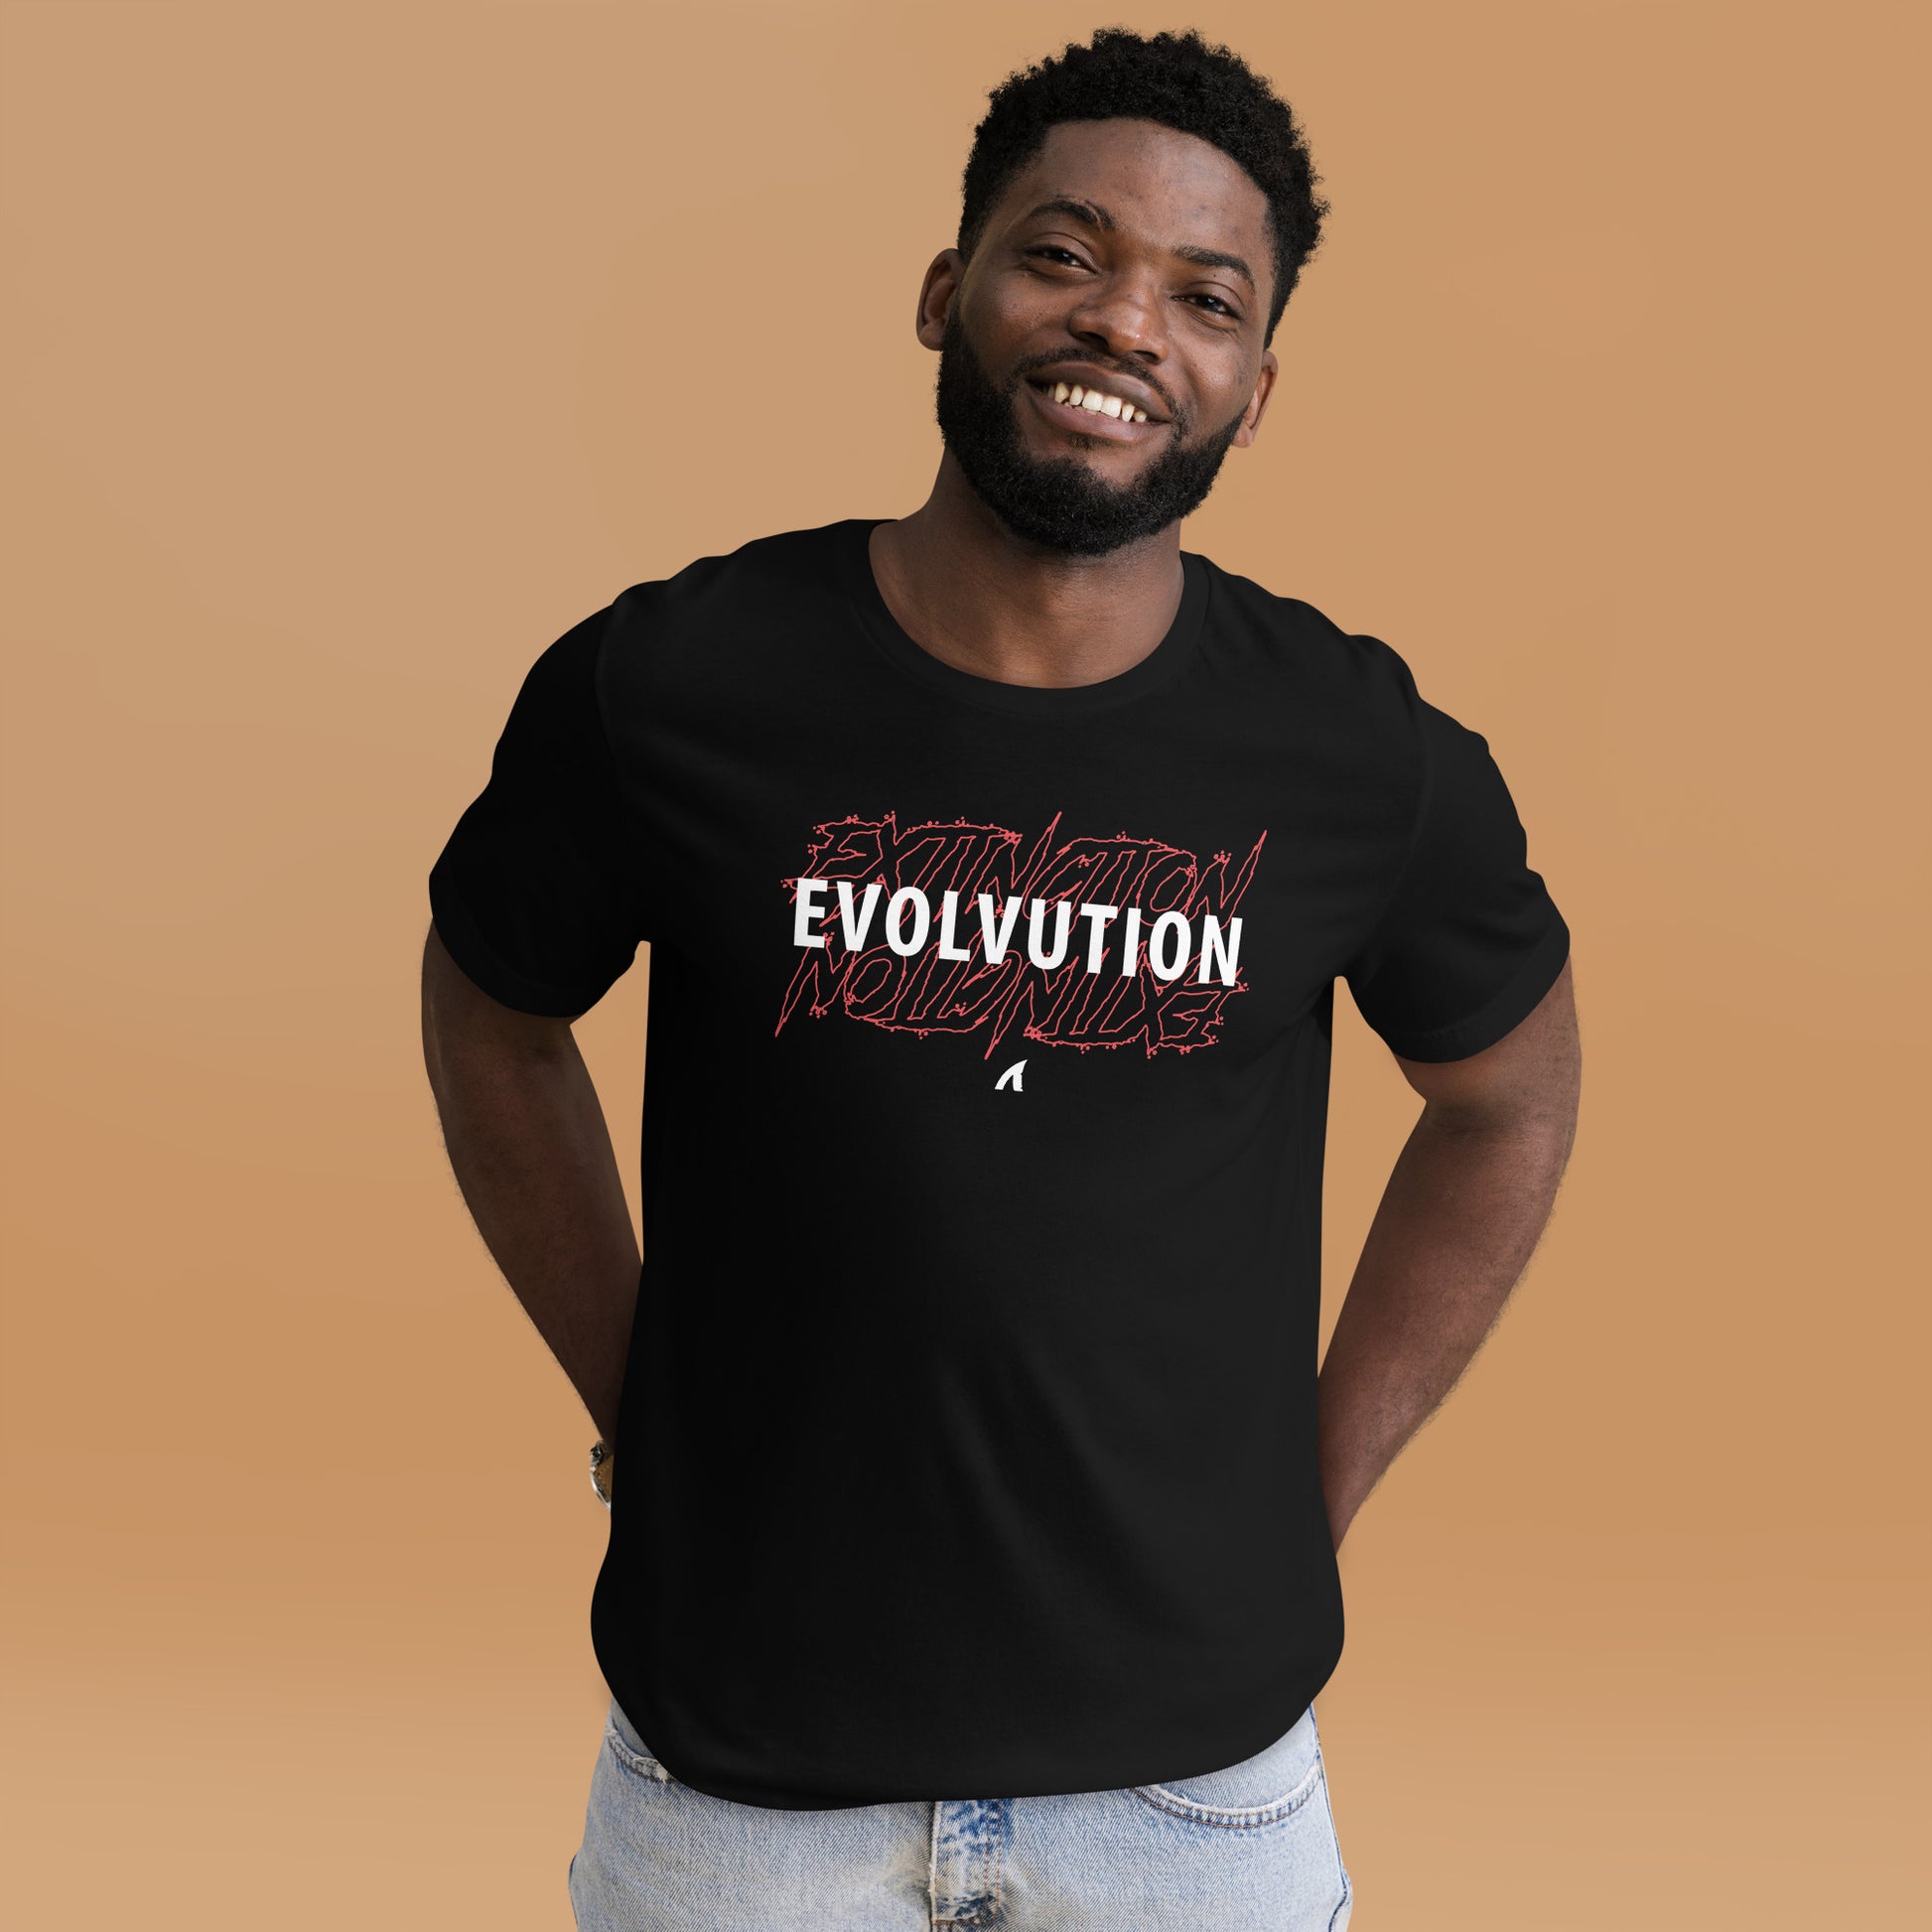 EVOLVUTION / EXTINCTION - Premium  from APEX USA - Just $32! Shop now at APEX USA